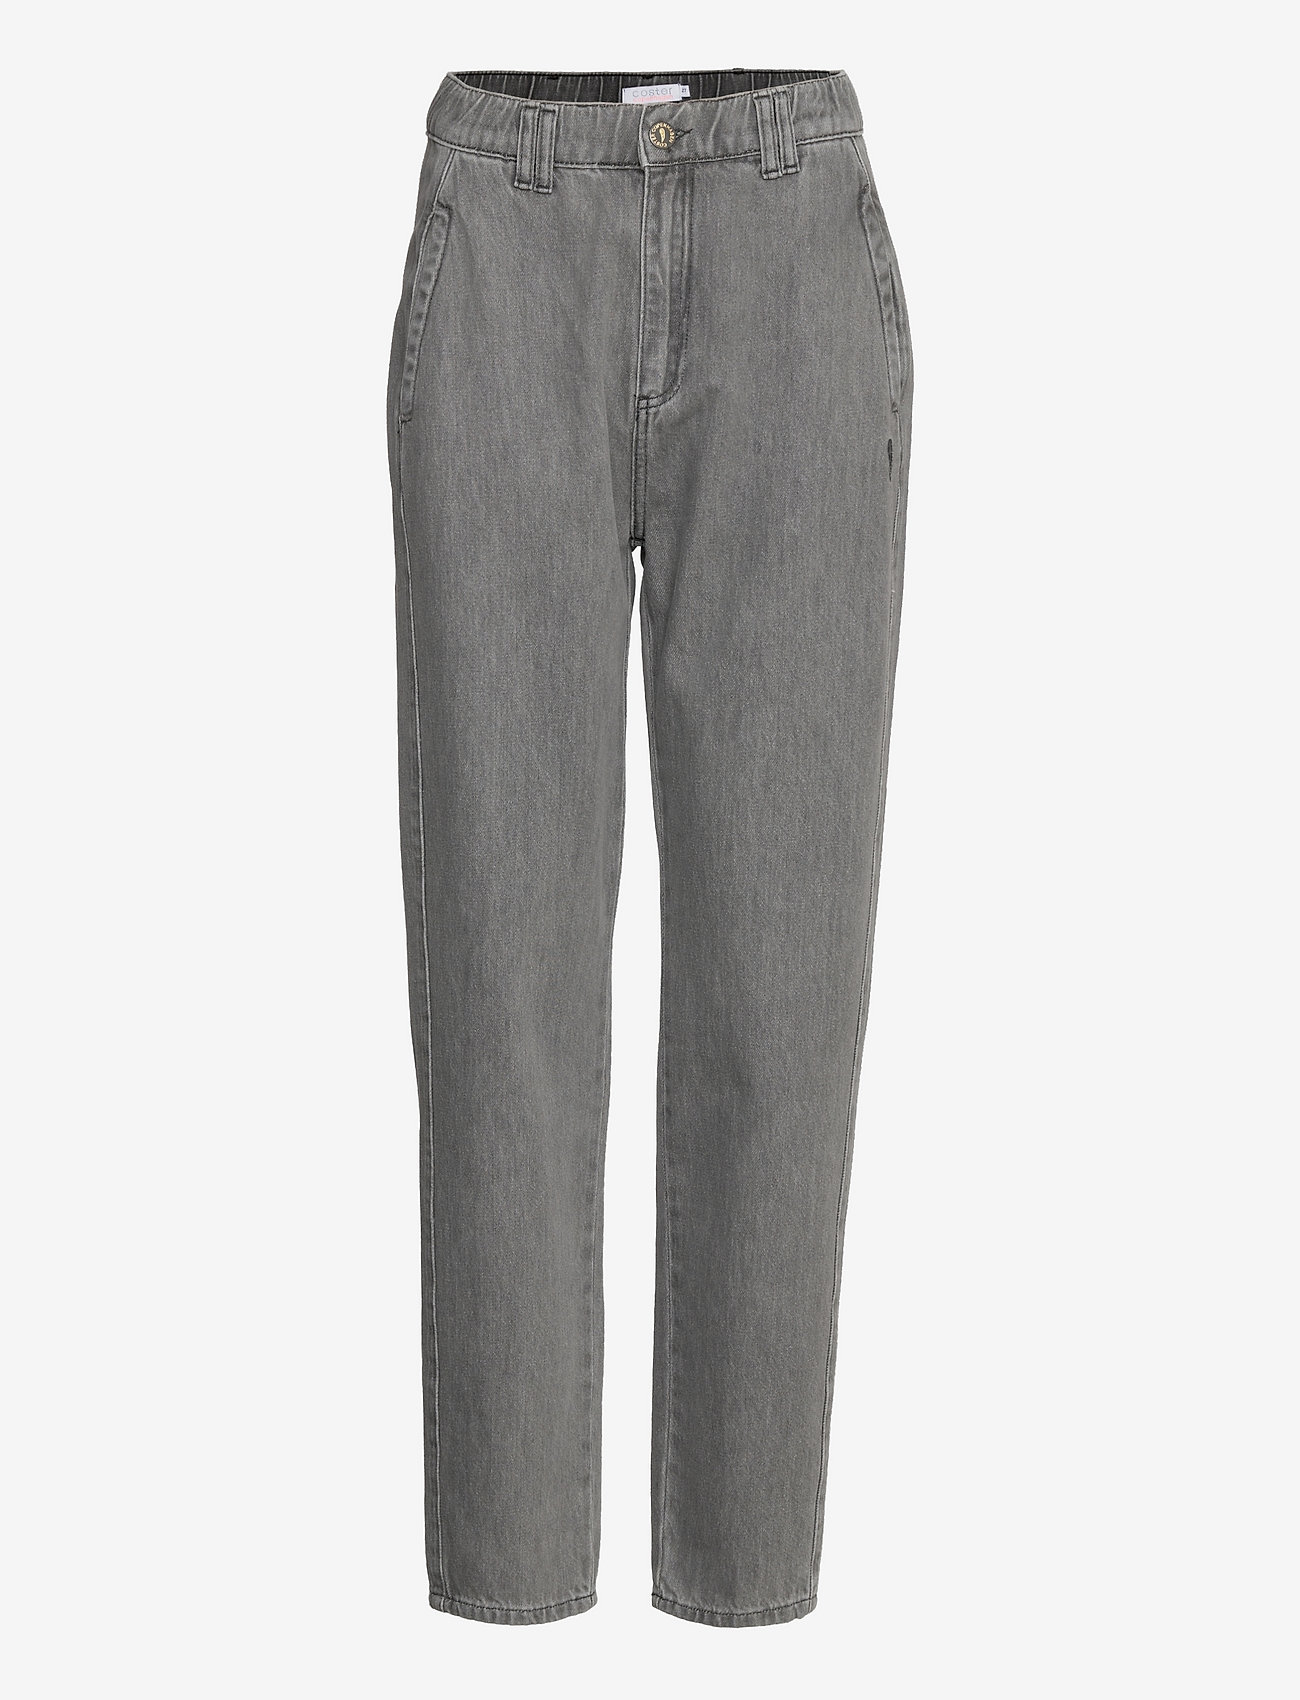 Coster Copenhagen - Loose fitted pants - ANNA fit - proste dżinsy - light grey wash - 0